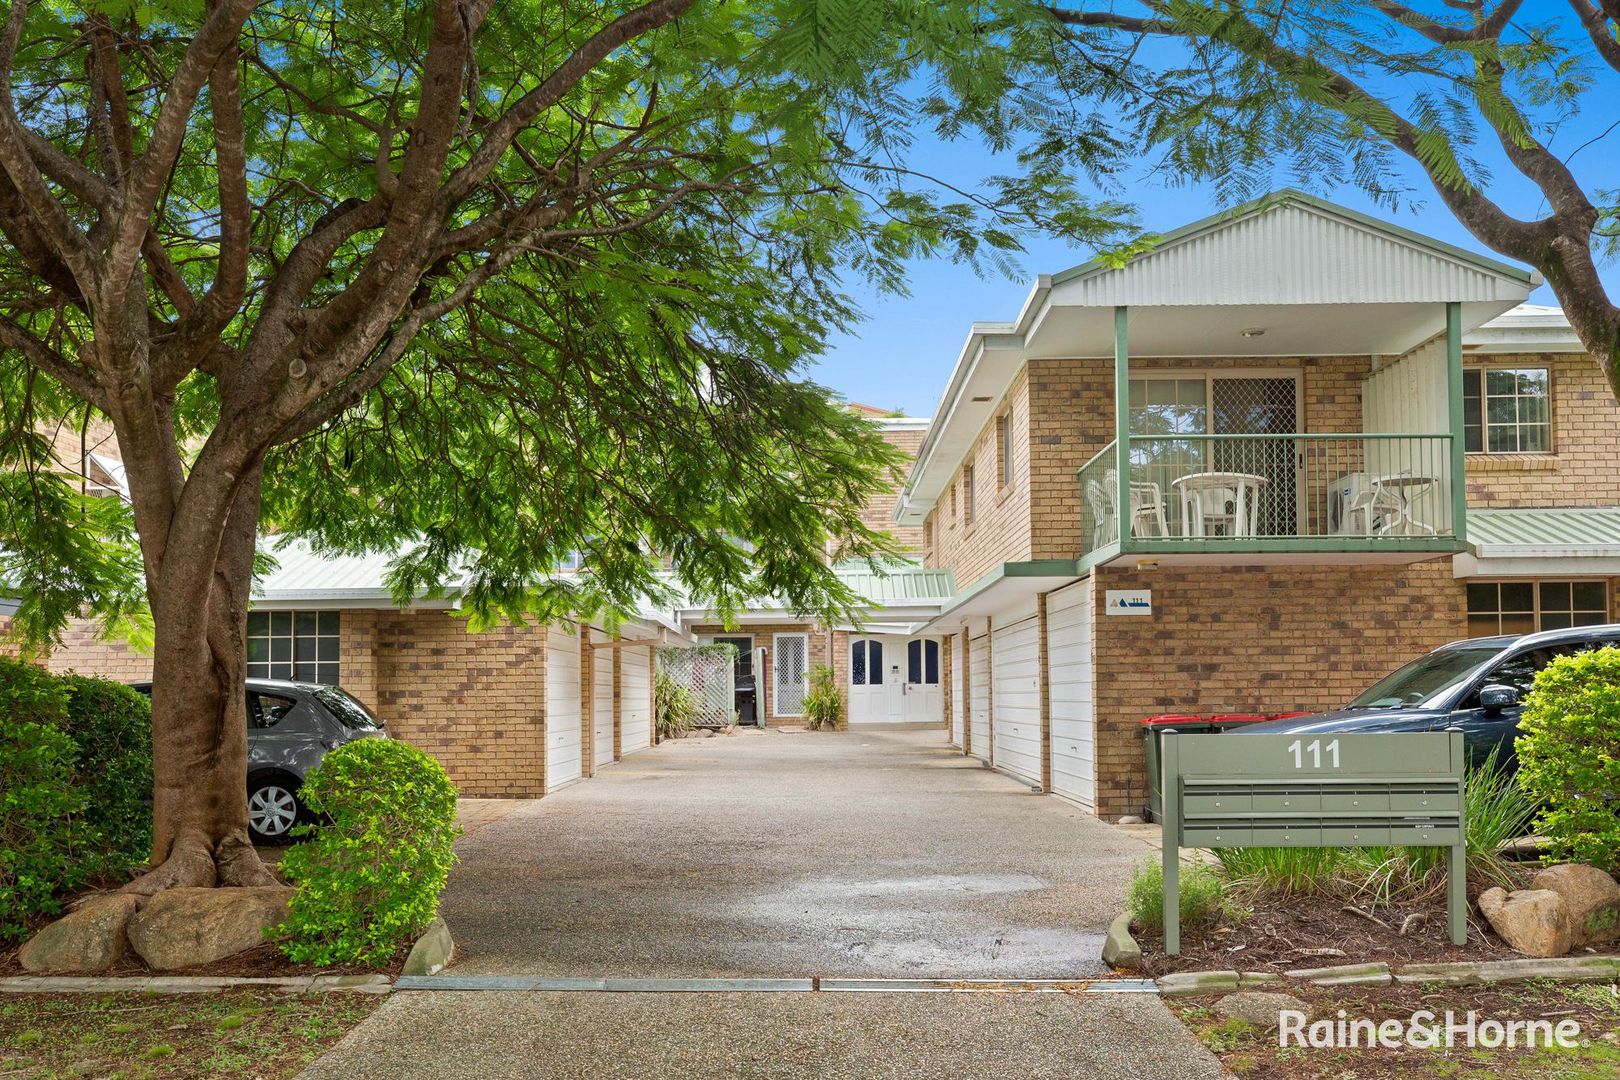 4/111 Central Avenue, Indooroopilly QLD 4068